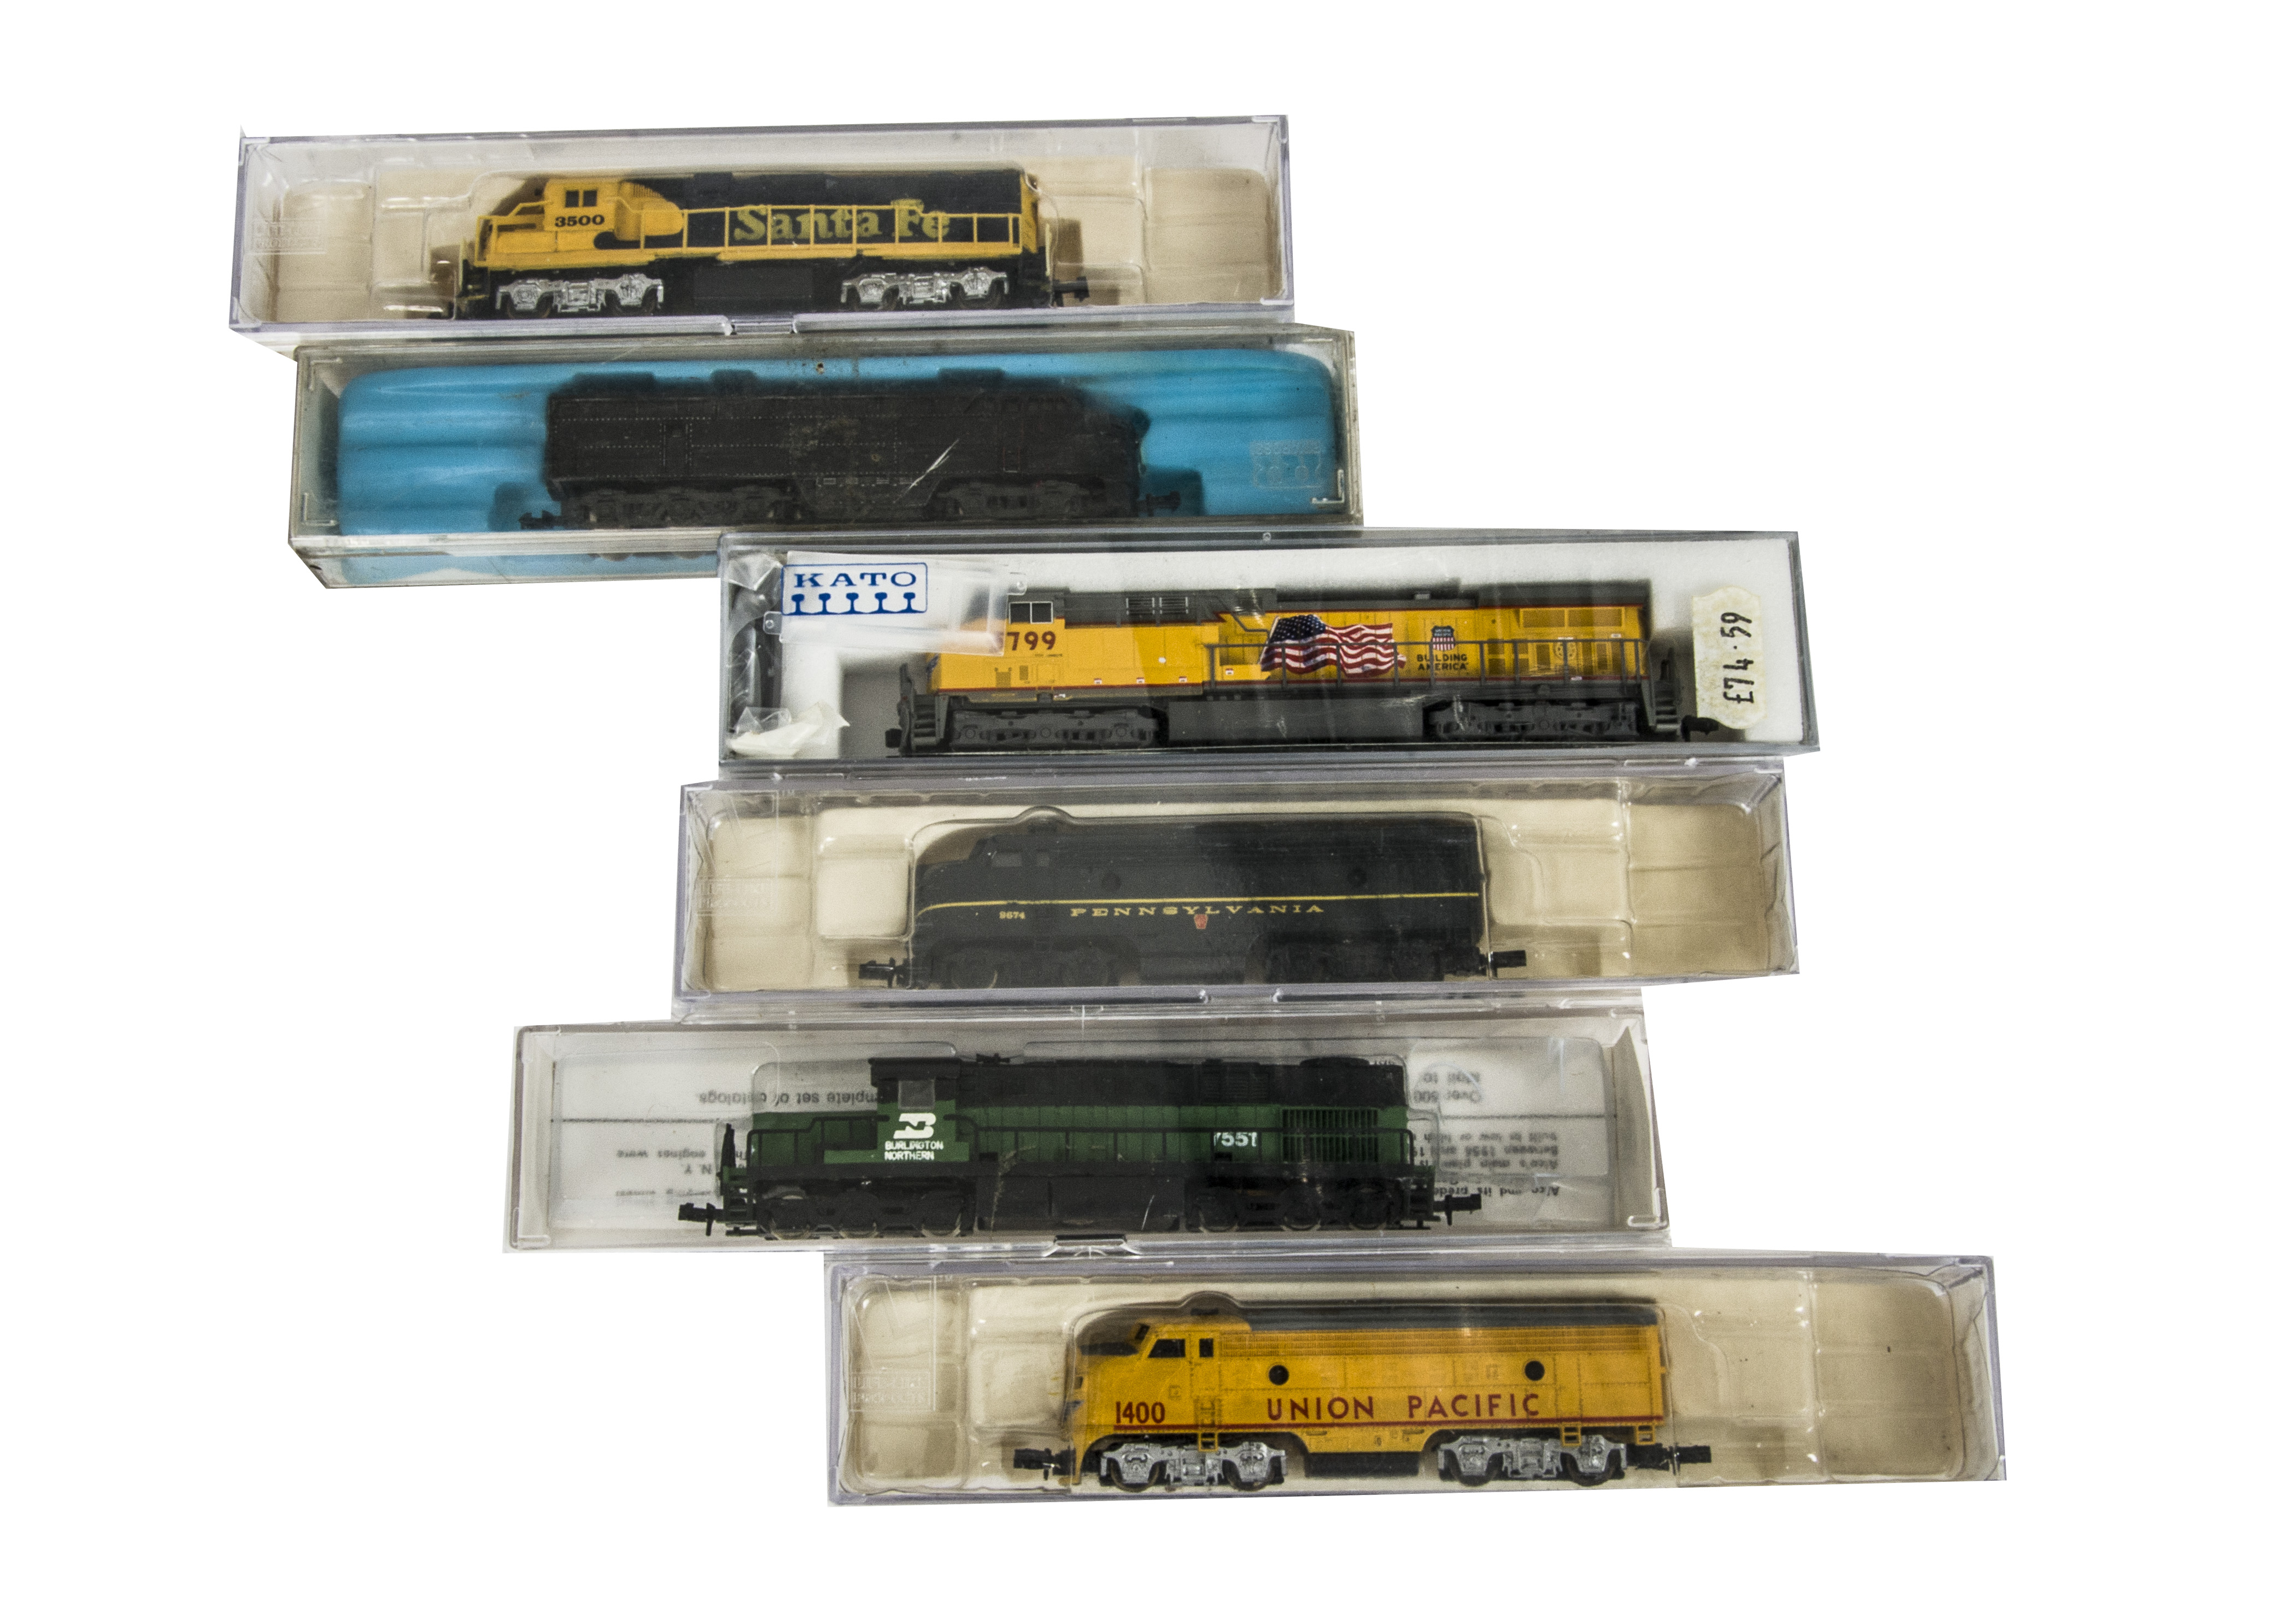 American Outline N Gauge Locomotives by various makers, Kato UP AC4400CW 5799, Model Power